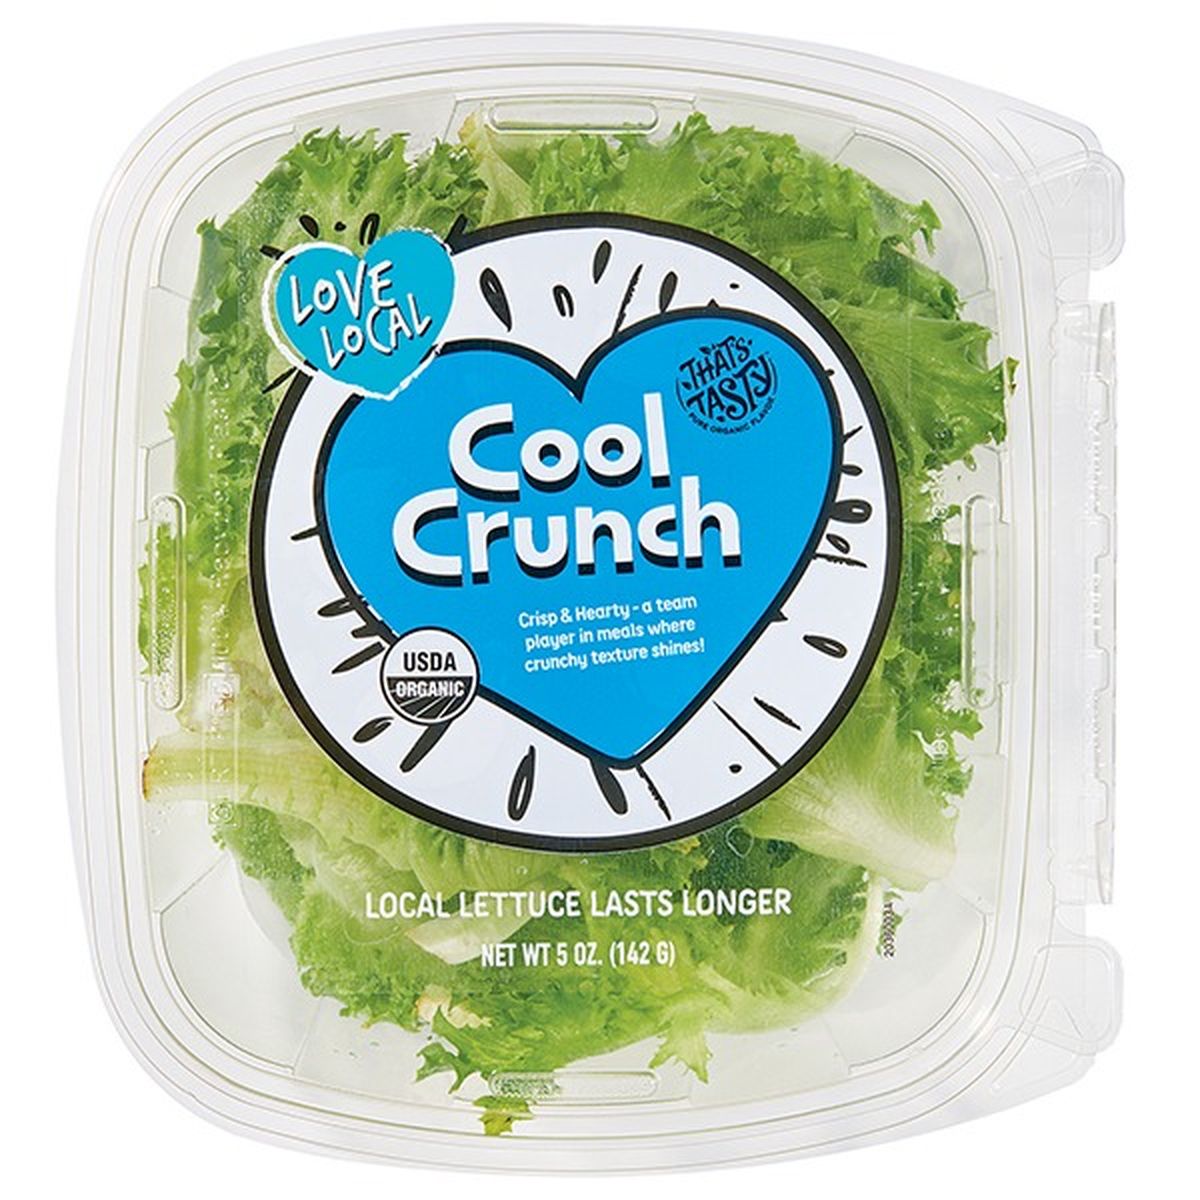 Calories in That's Tasty Organic Green Leaf Lettuce, Cool Crunch